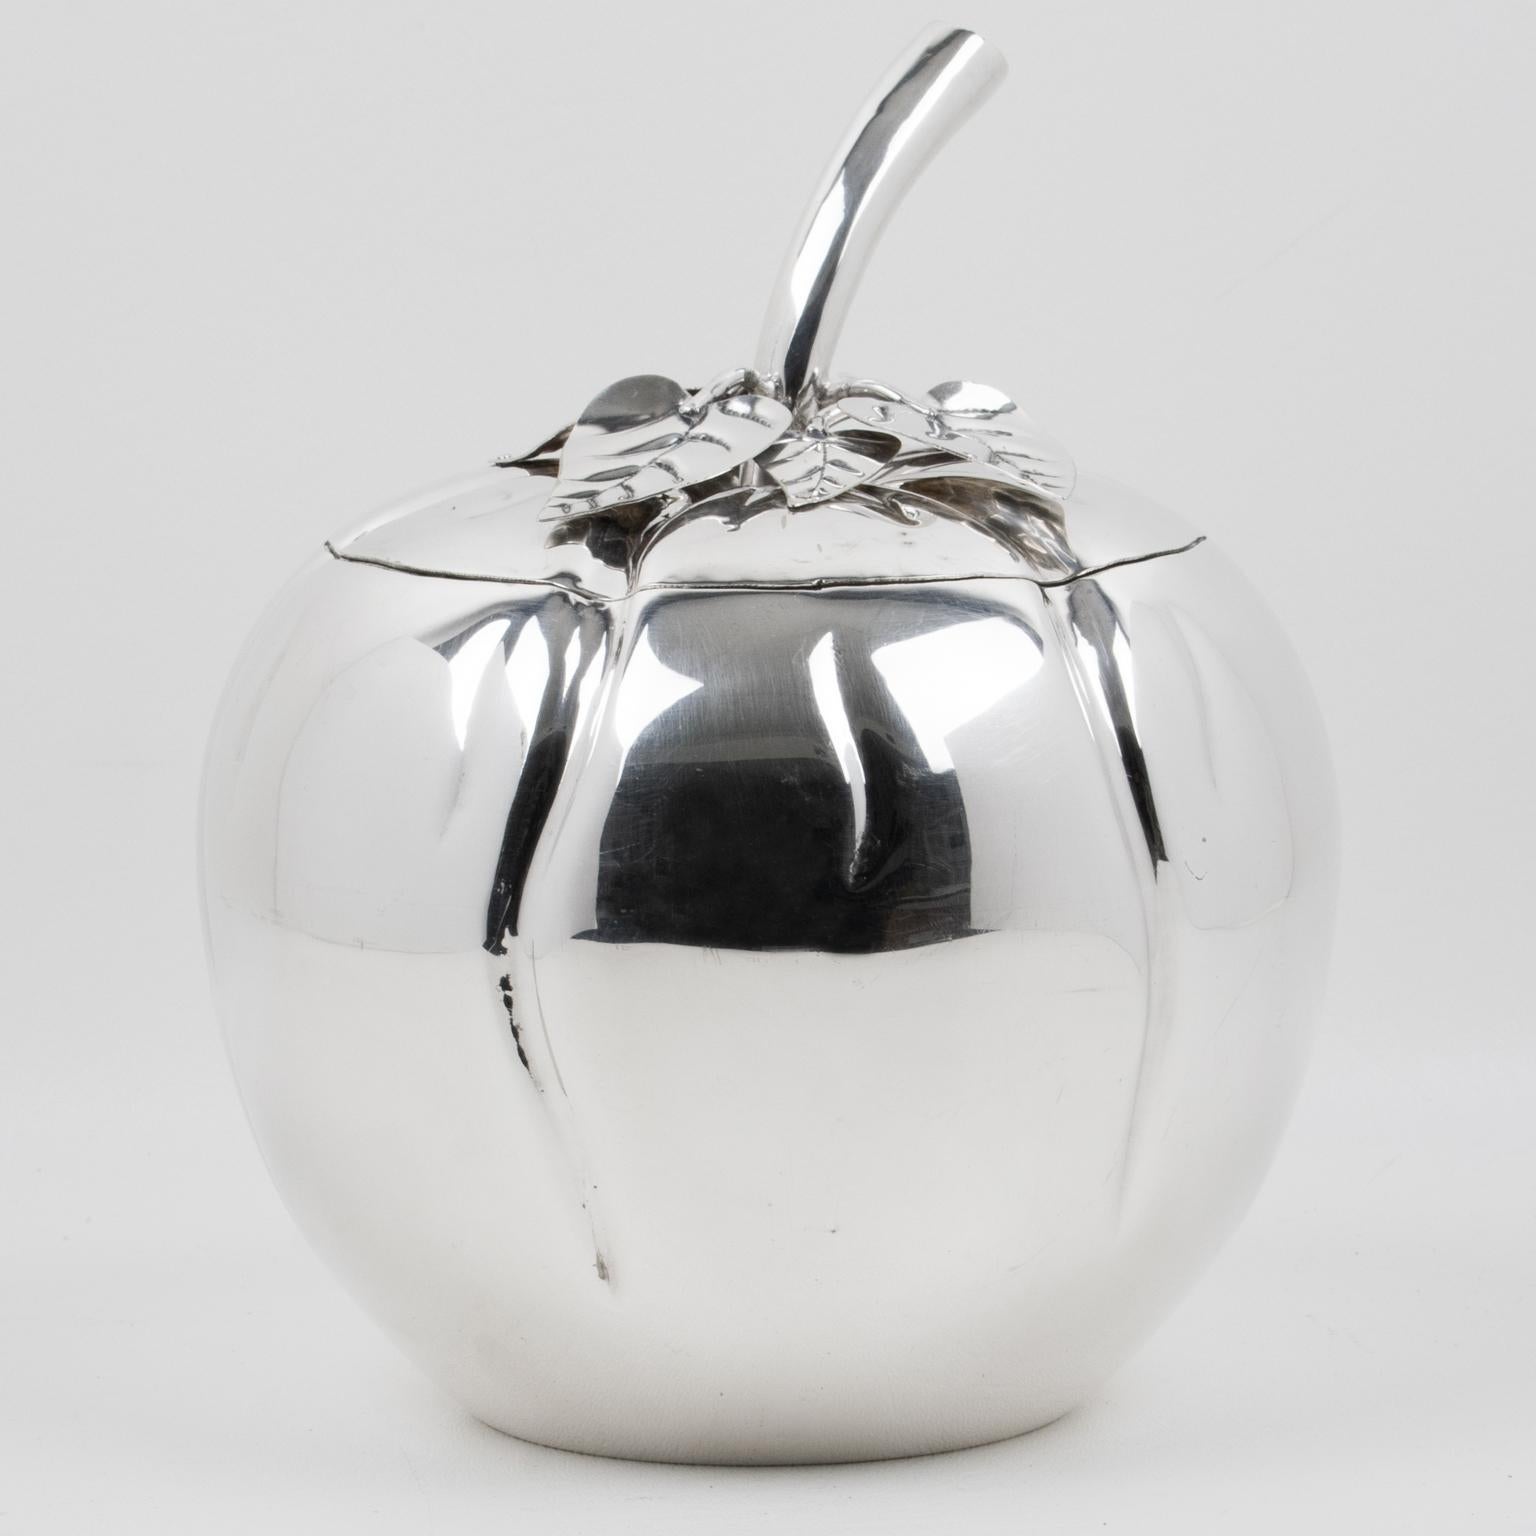 Mid-20th Century Teghini Firenze Silver Plate Tomato-shaped Ice Bucket, Italy 1960s For Sale